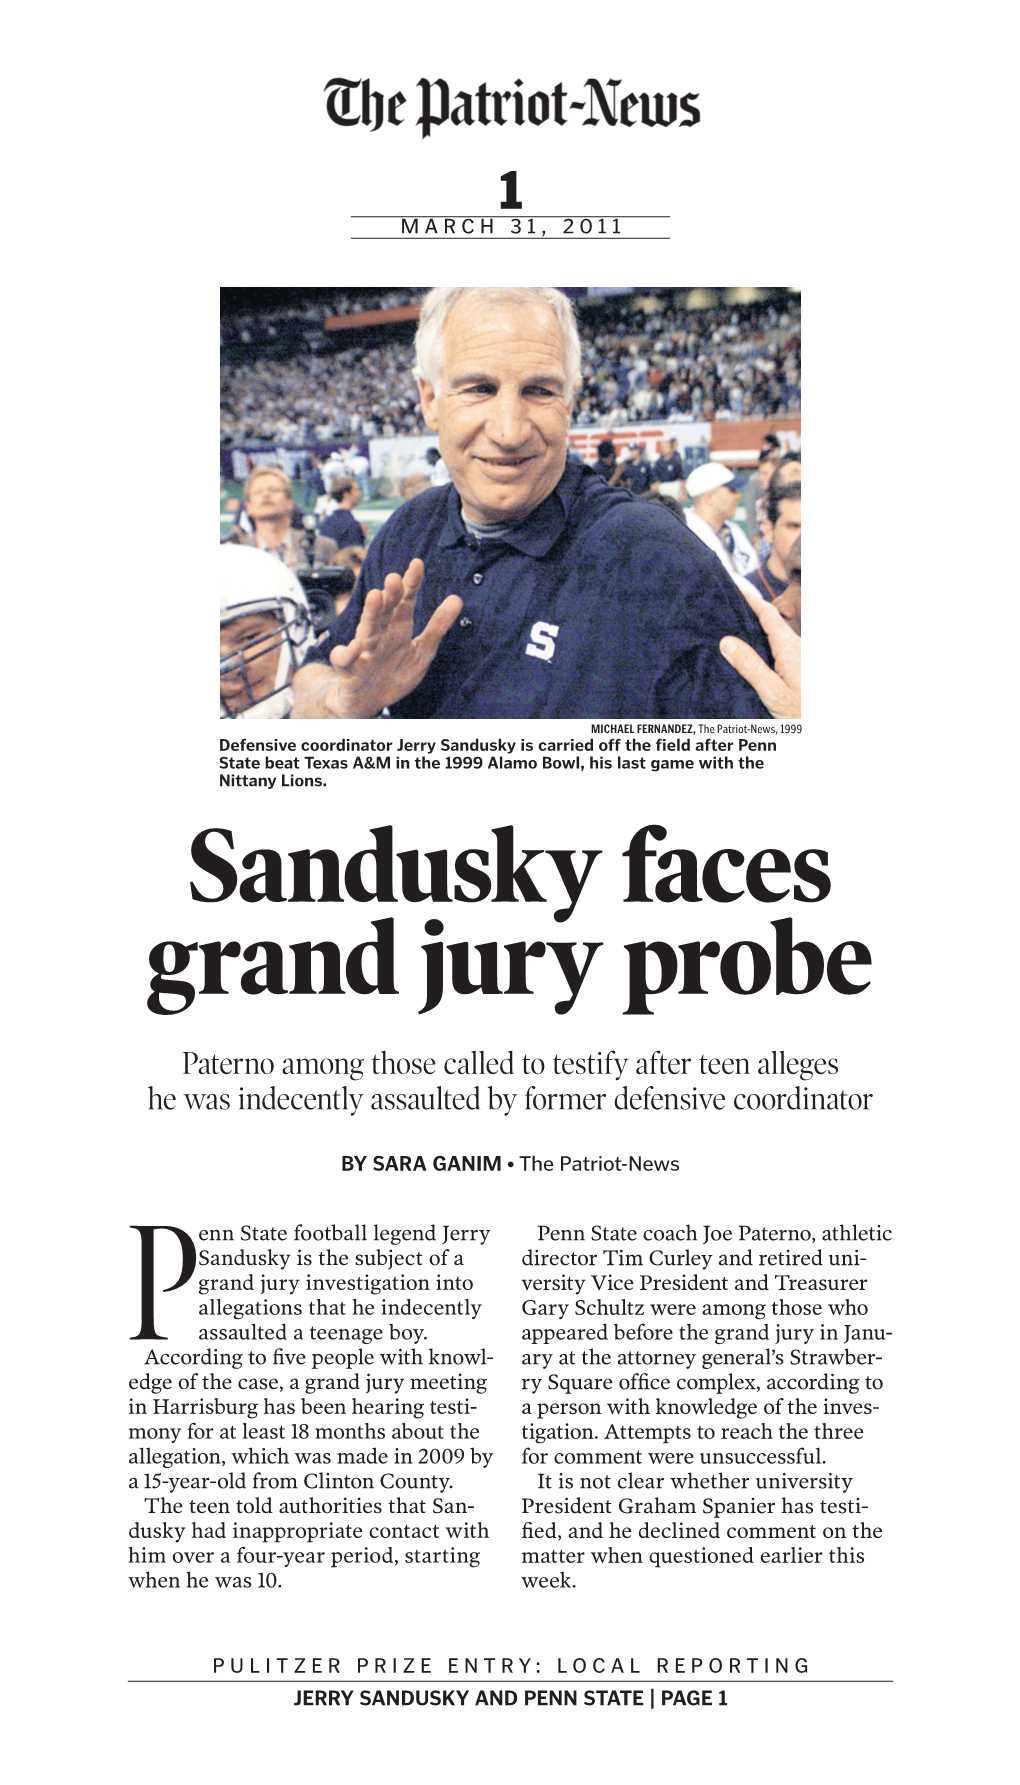 Sandusky Faces Grand Jury Probe Paterno Among Those Called to Testify After Teen Alleges He Was Indecently Assaulted by Former Defensive Coordinator